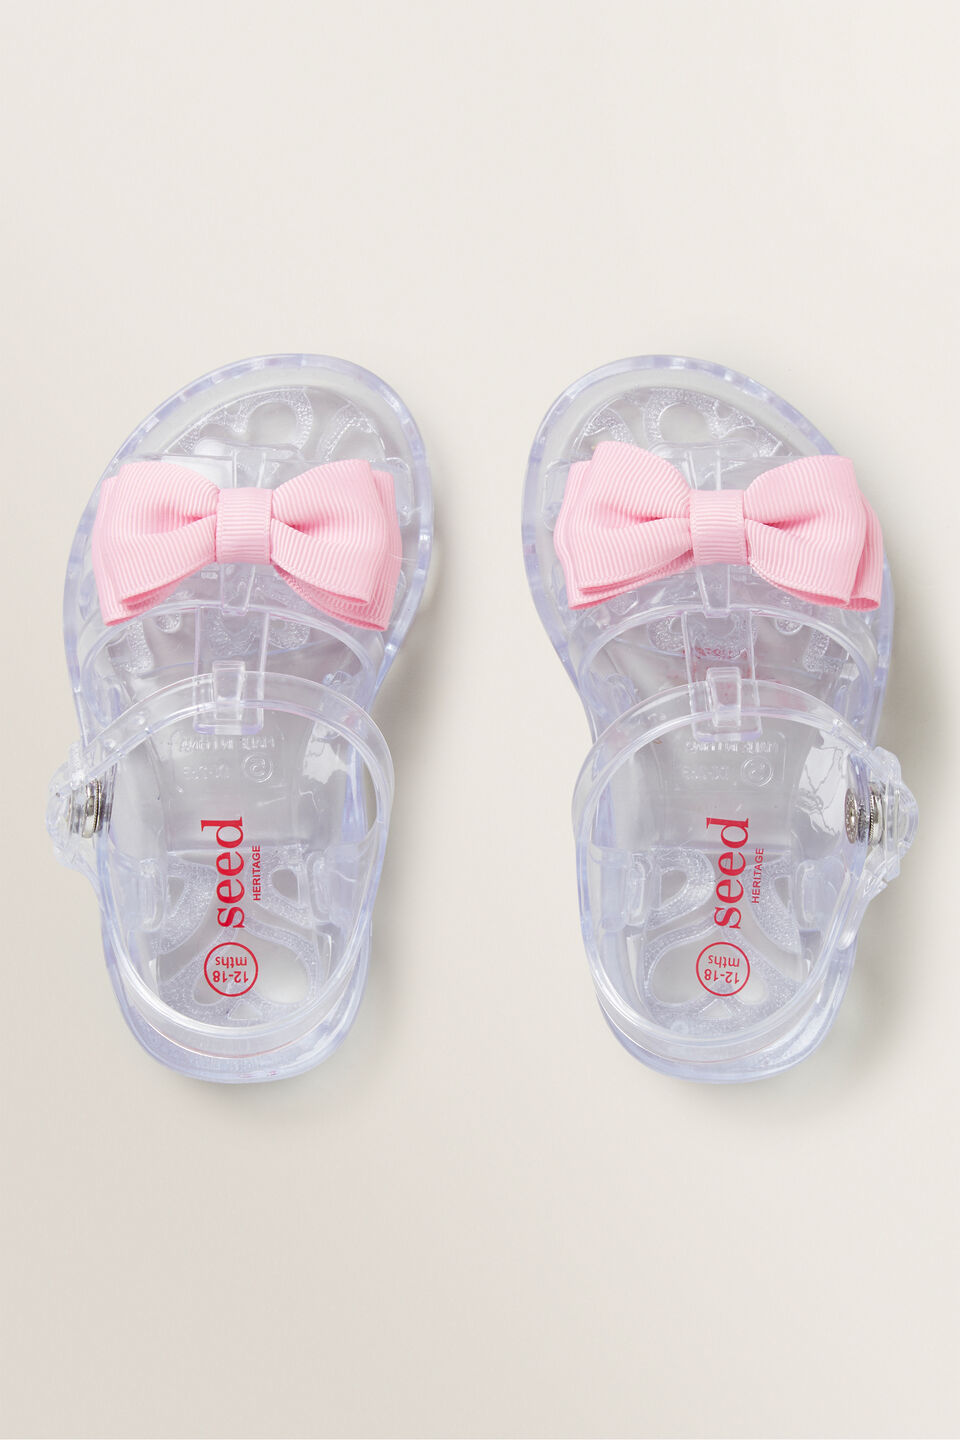 Jelly Sandals  